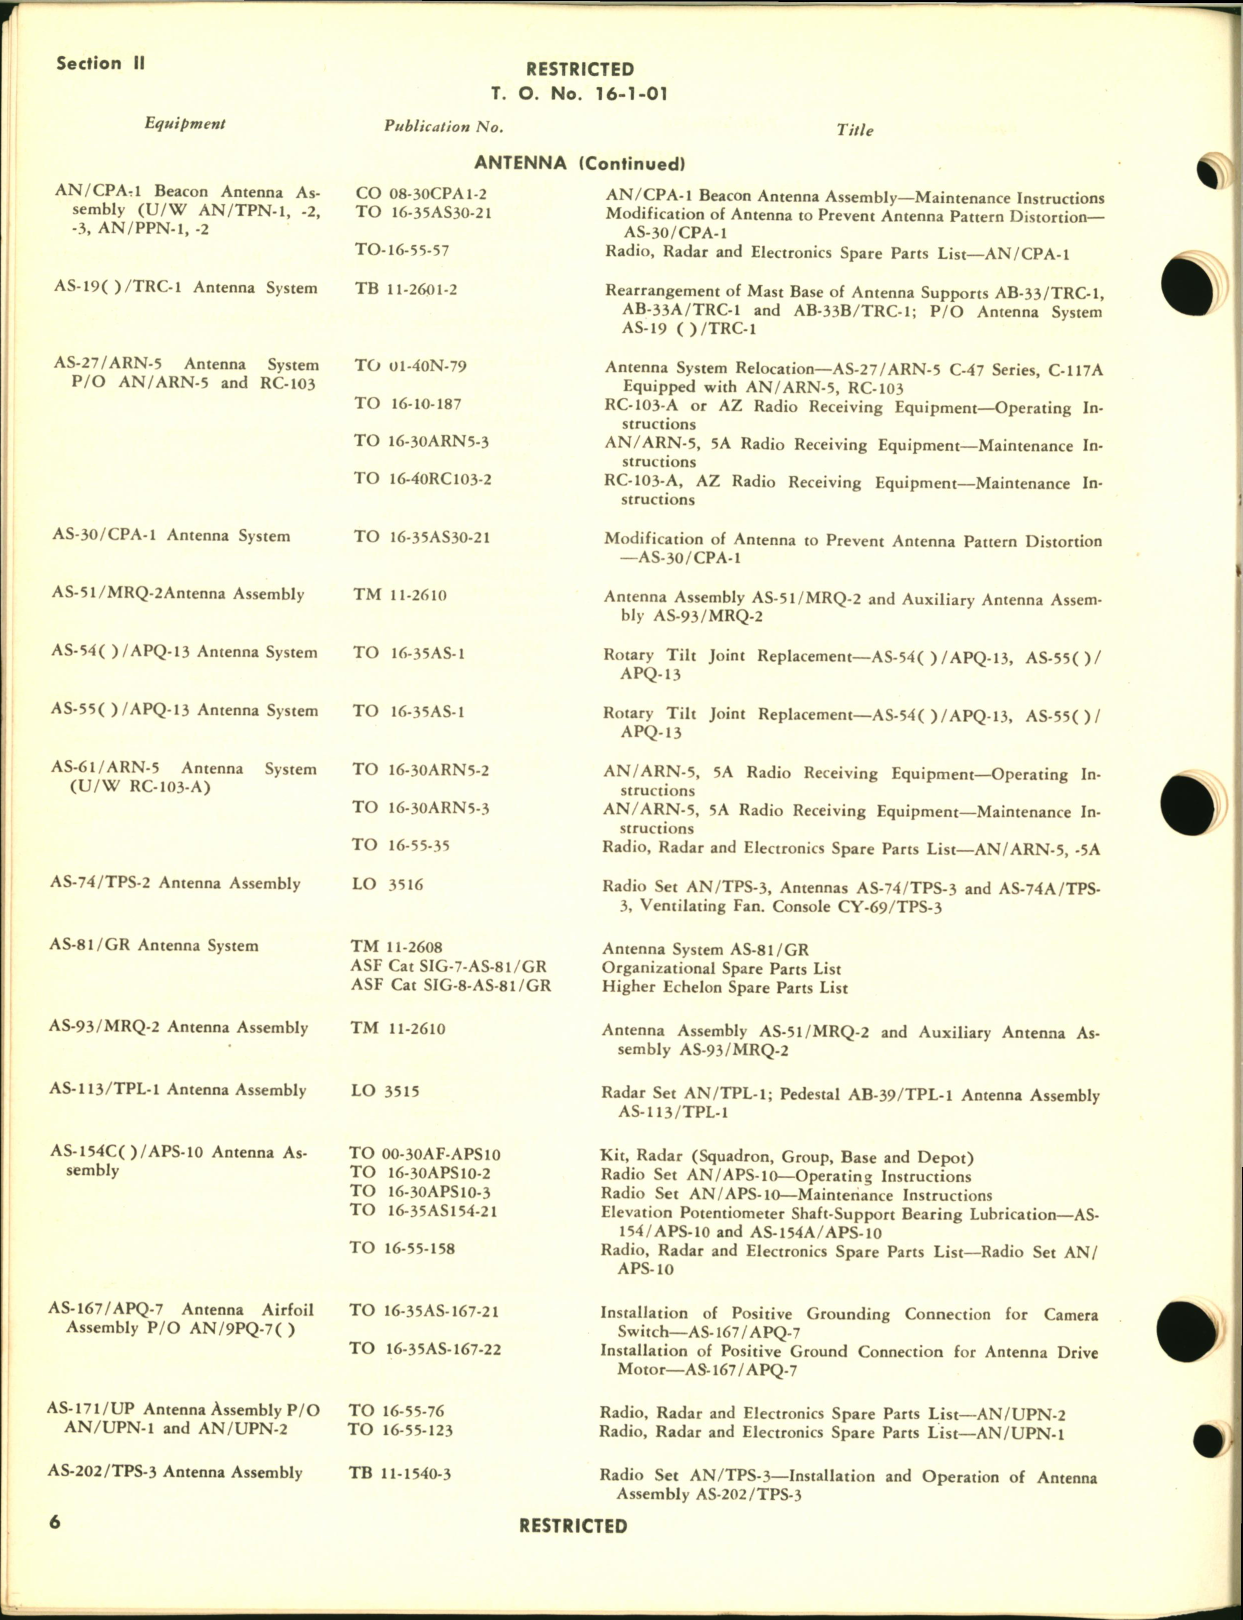 Sample page 8 from AirCorps Library document: List of Technical Publications - Communications Equipment